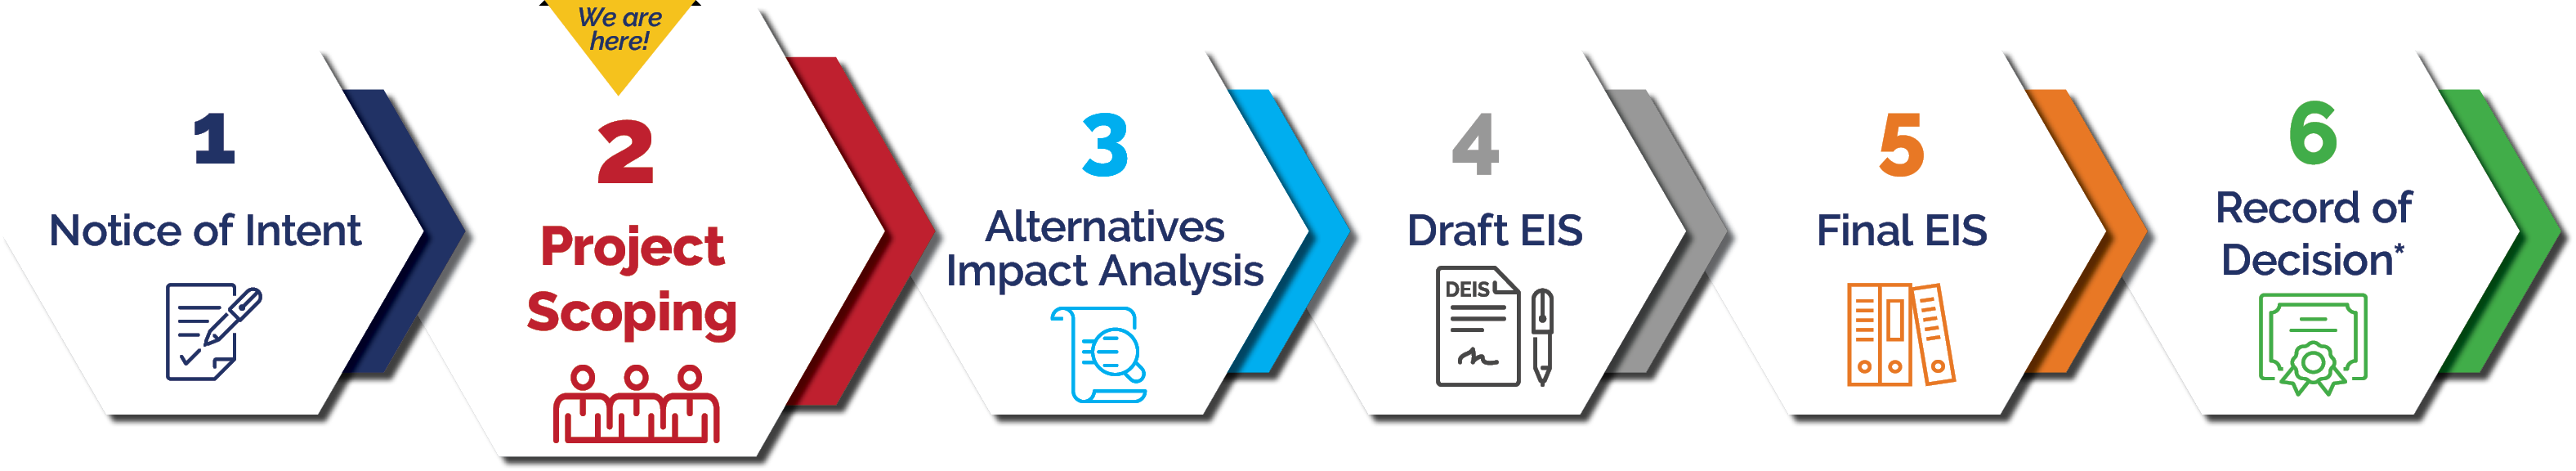 1: Notice of intent. 2: Project Scoping (We are here). 3: Alternatives Impact Analysis. 4: Draft EIS. 5: Final EIS. 6: Record of Decisions.